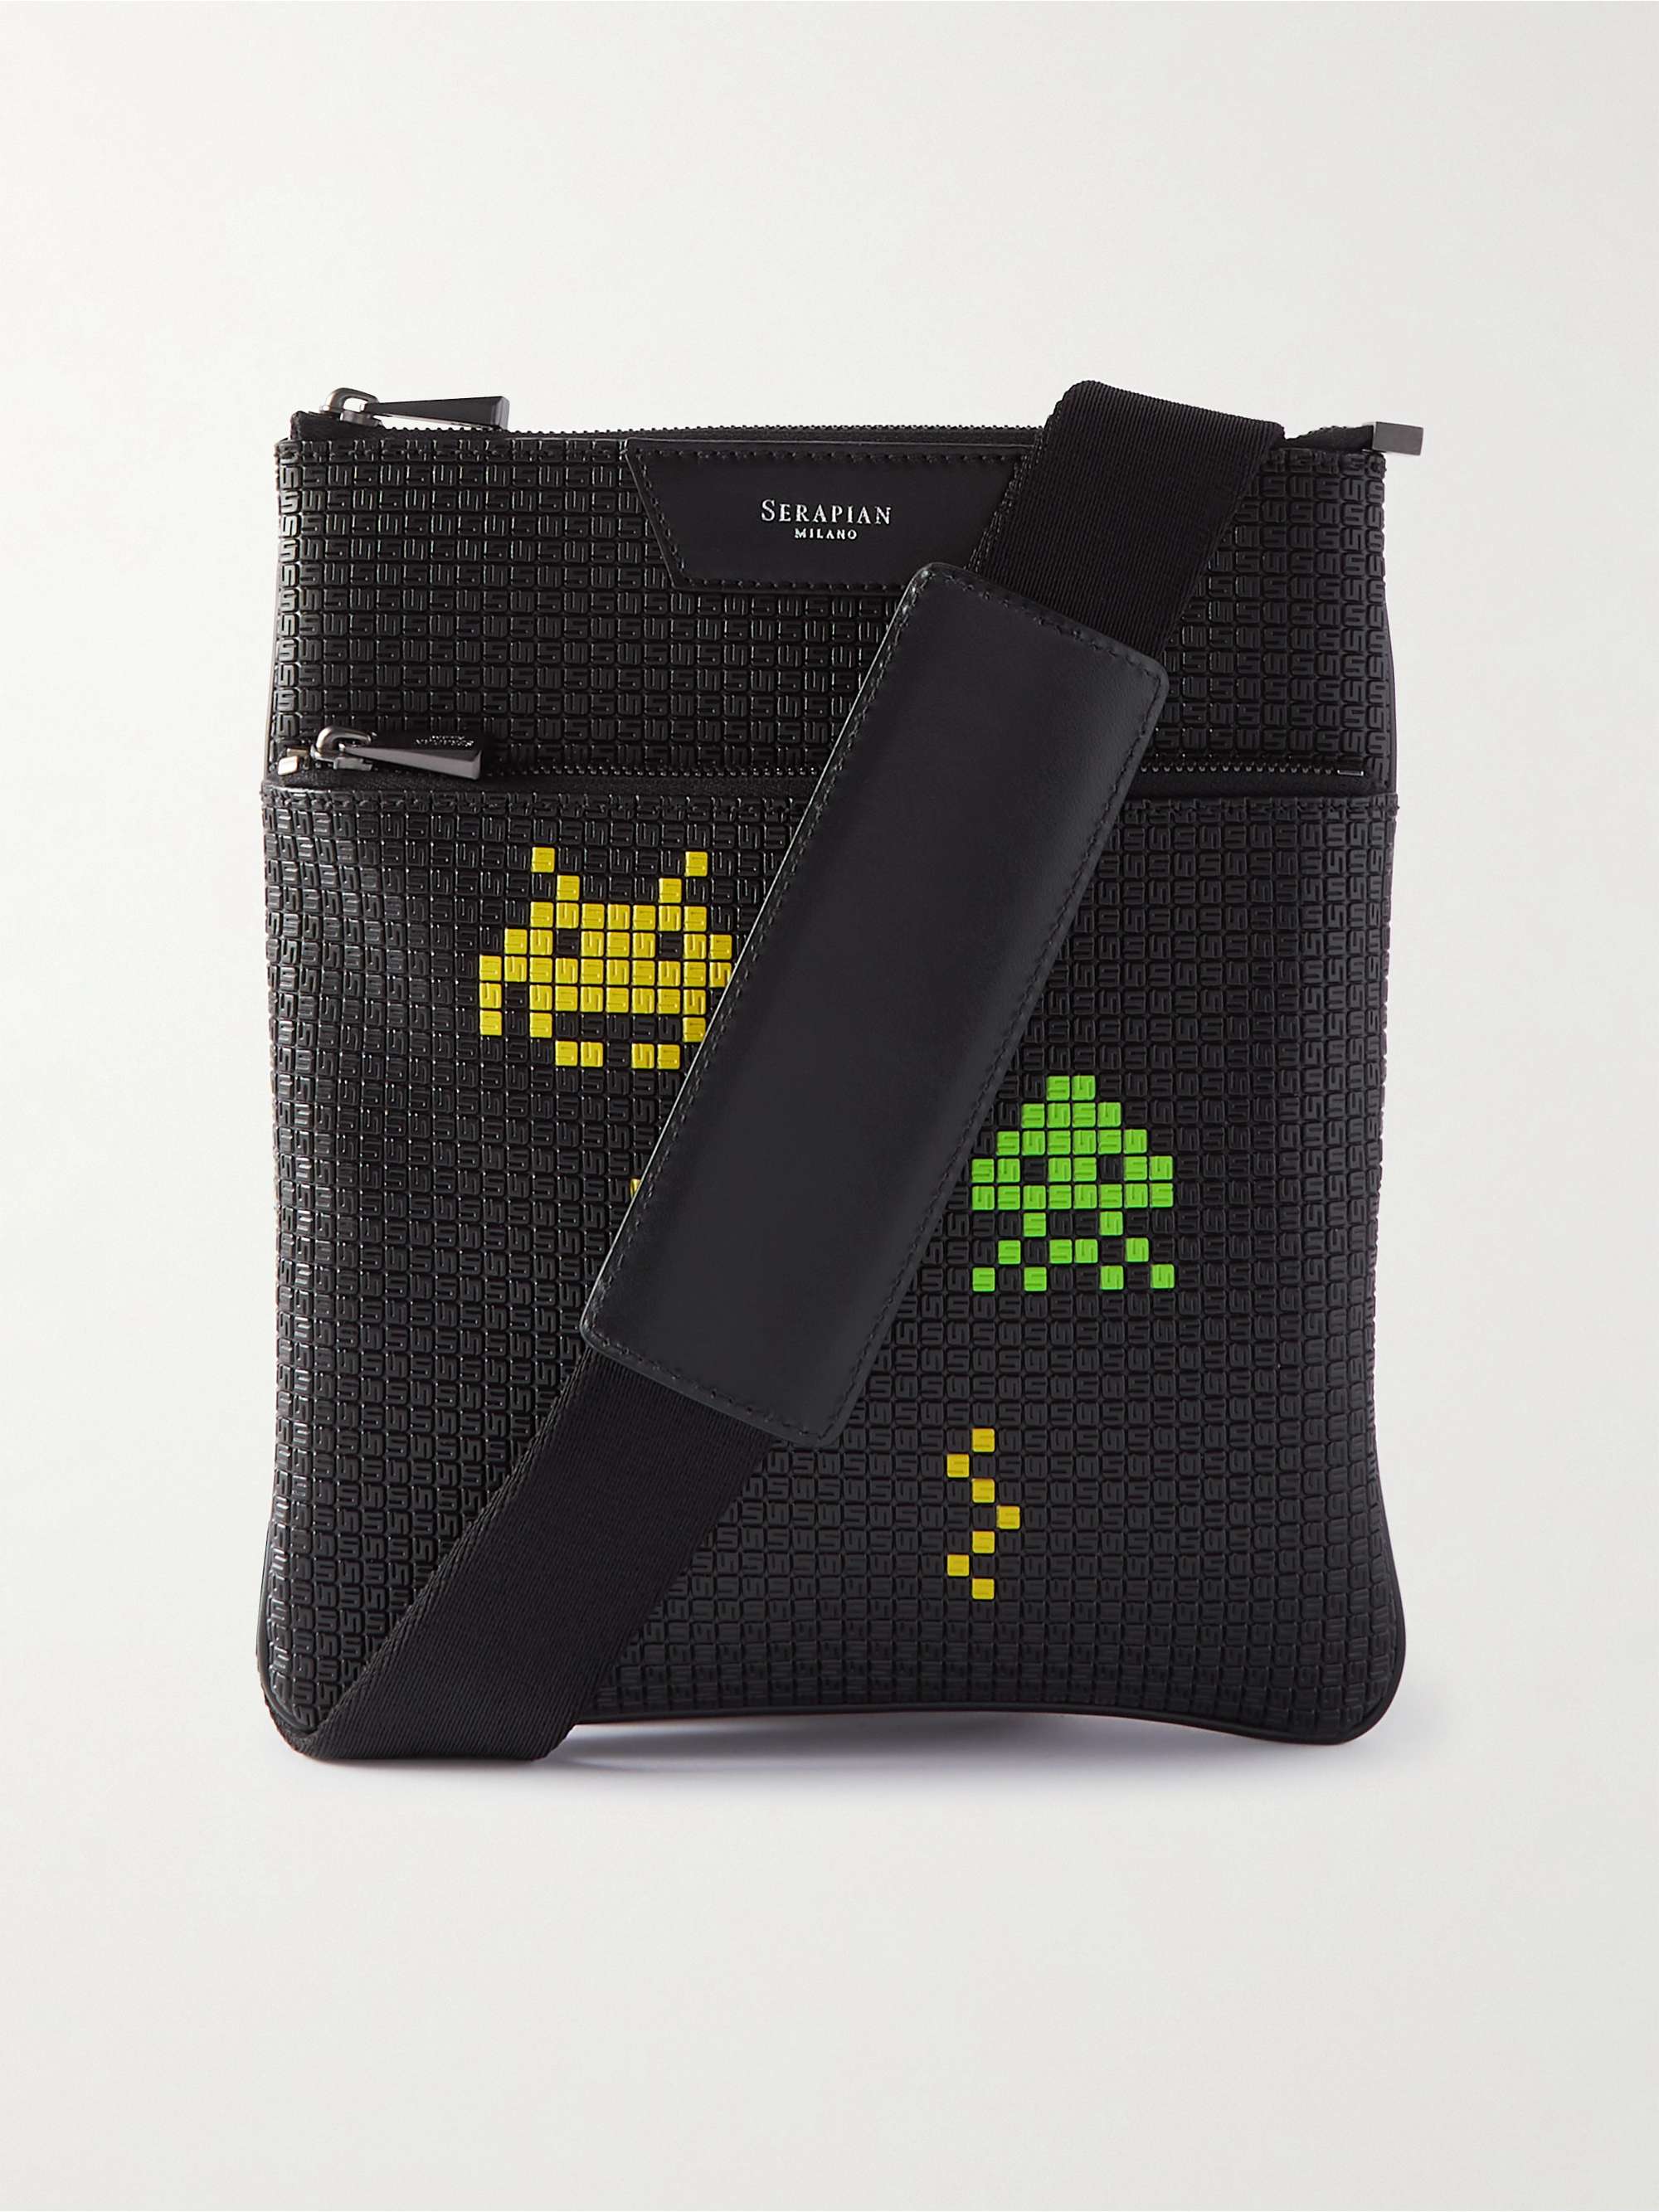 SERAPIAN + Space Invaders Leather-Trimmed Printed Stepan Coated-Canvas Messenger Bag